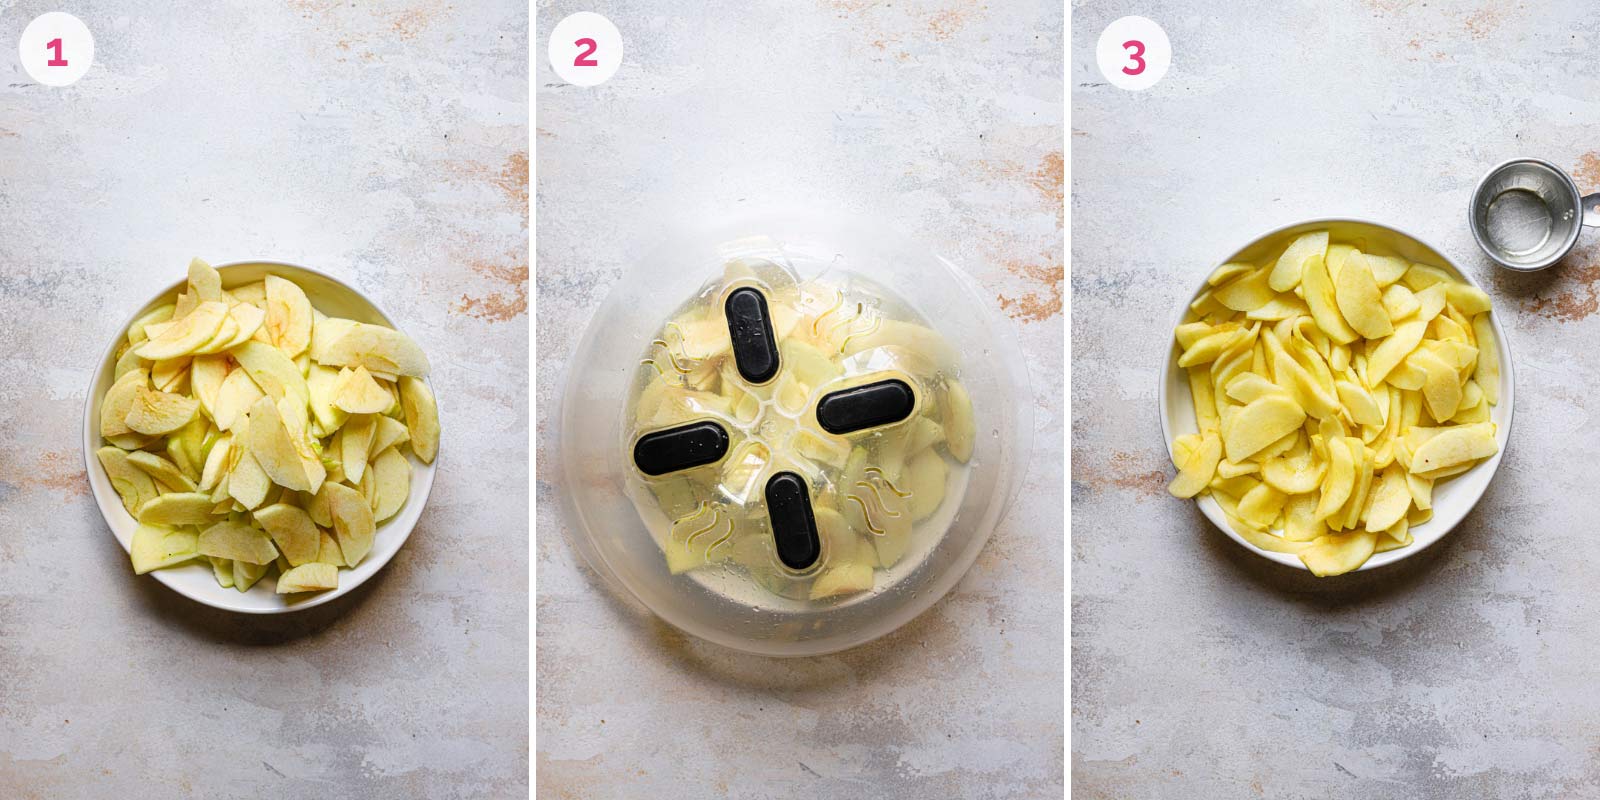 Step-by-step photos of sliced apples before and after being microwaved to par-cook.